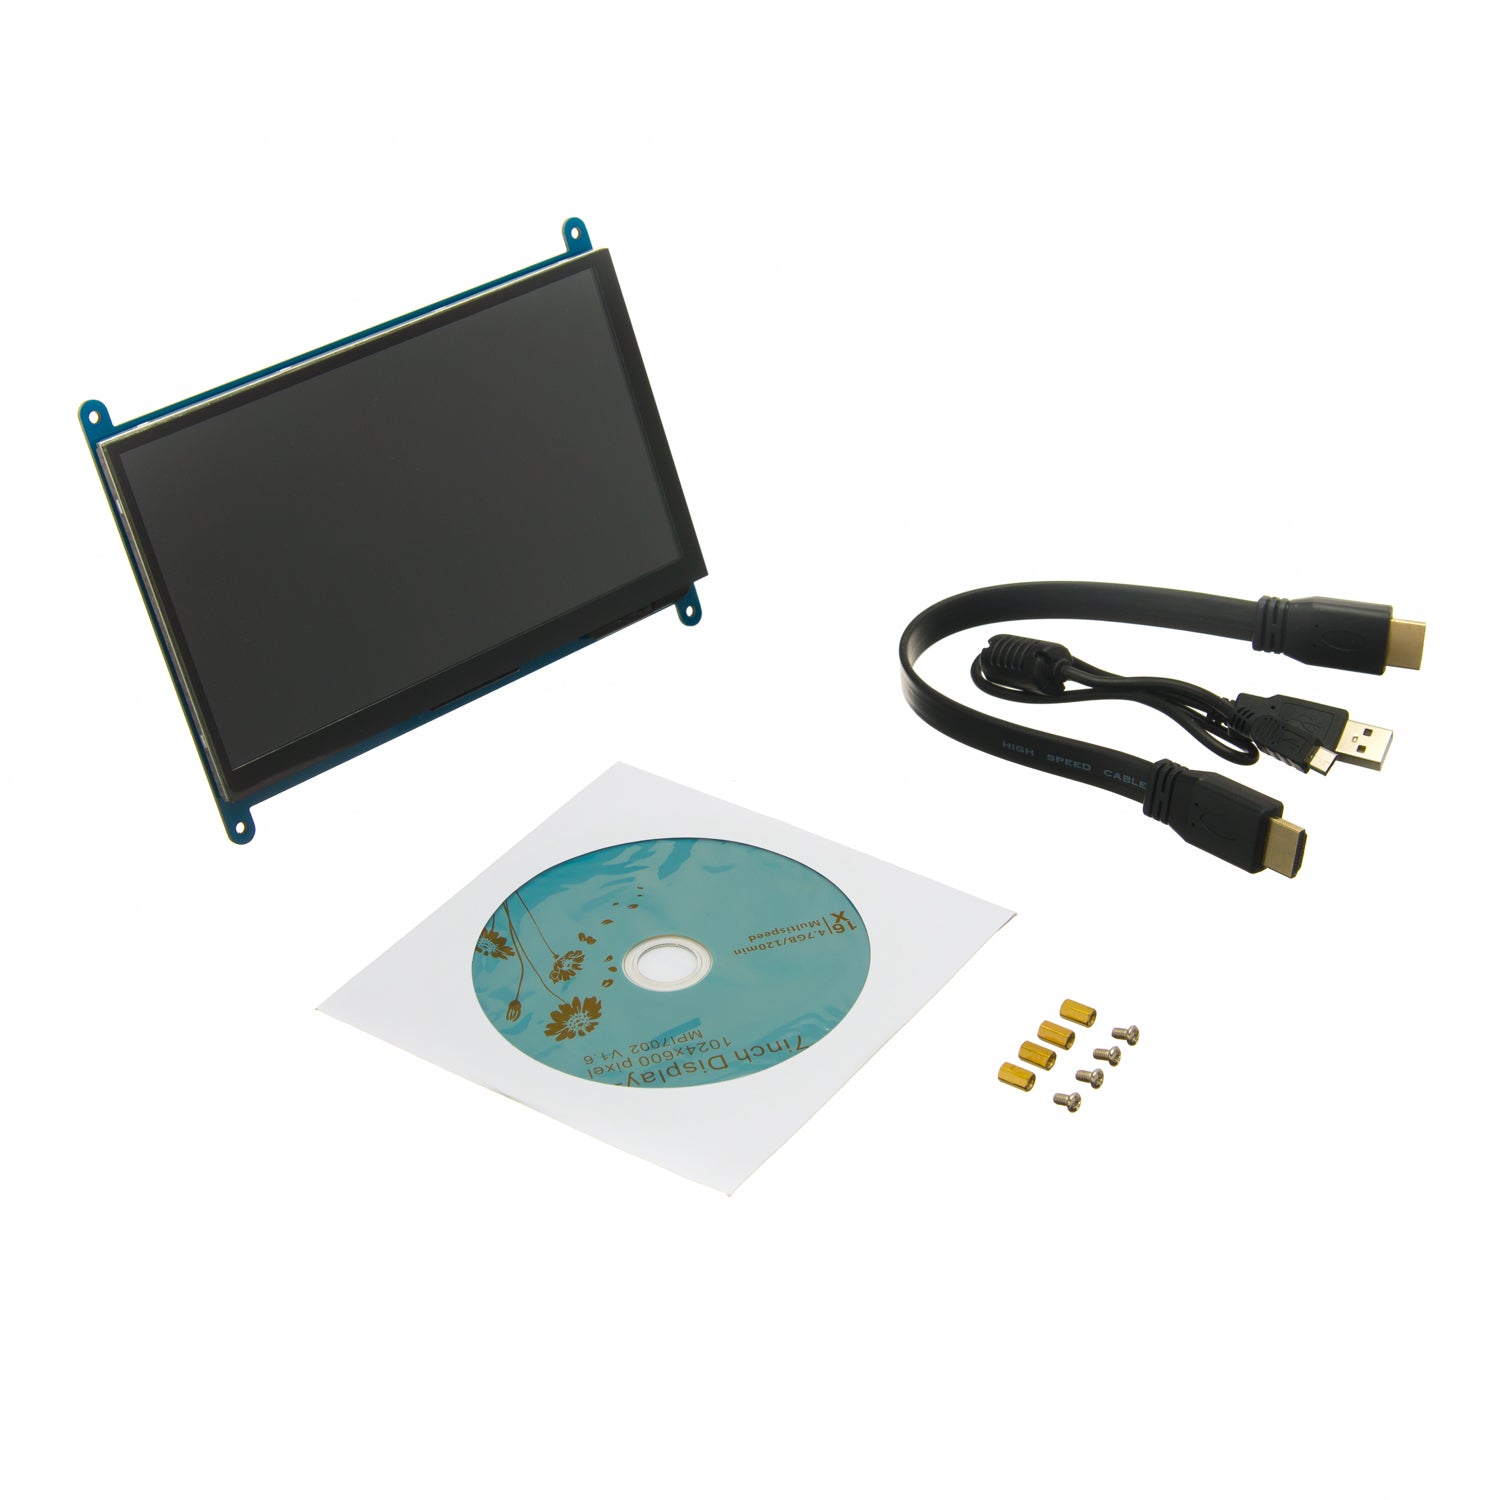 HD 7 inch LCD HDMI Touch Screen Display TFT for Raspberry Pi